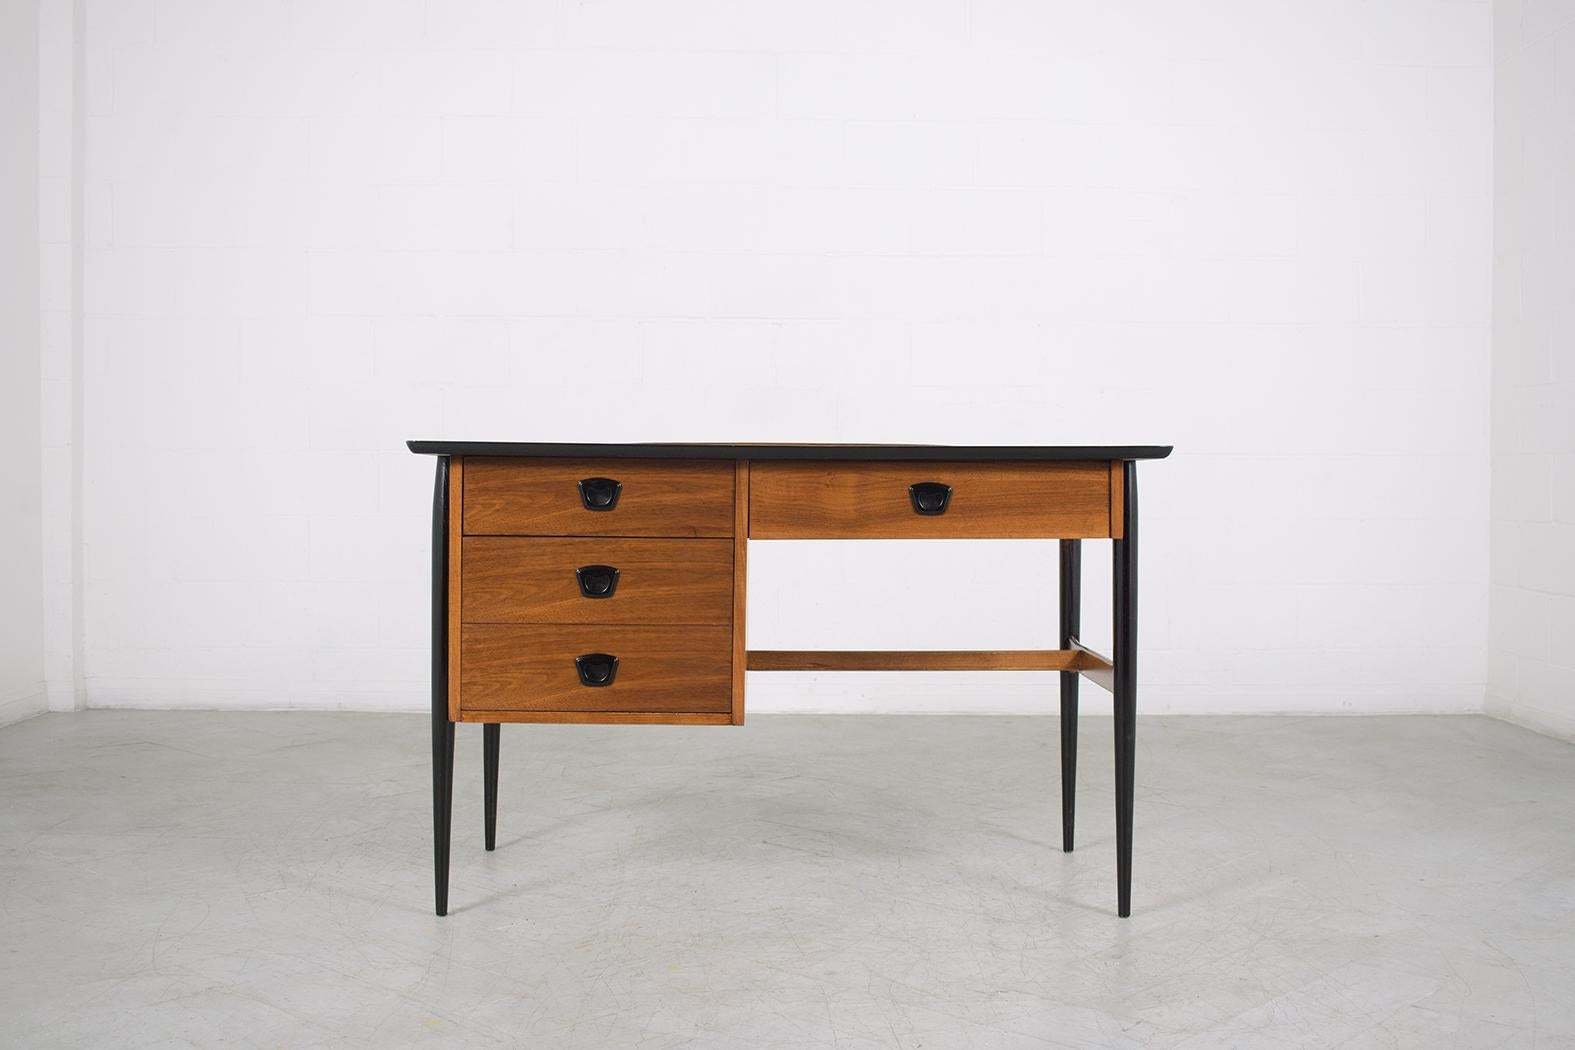 An extraordinary 1960s danish modern desk is hand-crafted out of walnut wood and is in great condition has been completely restored stripped and refinished by our professional expert craftsmen team making this piece ready to be displayed and used